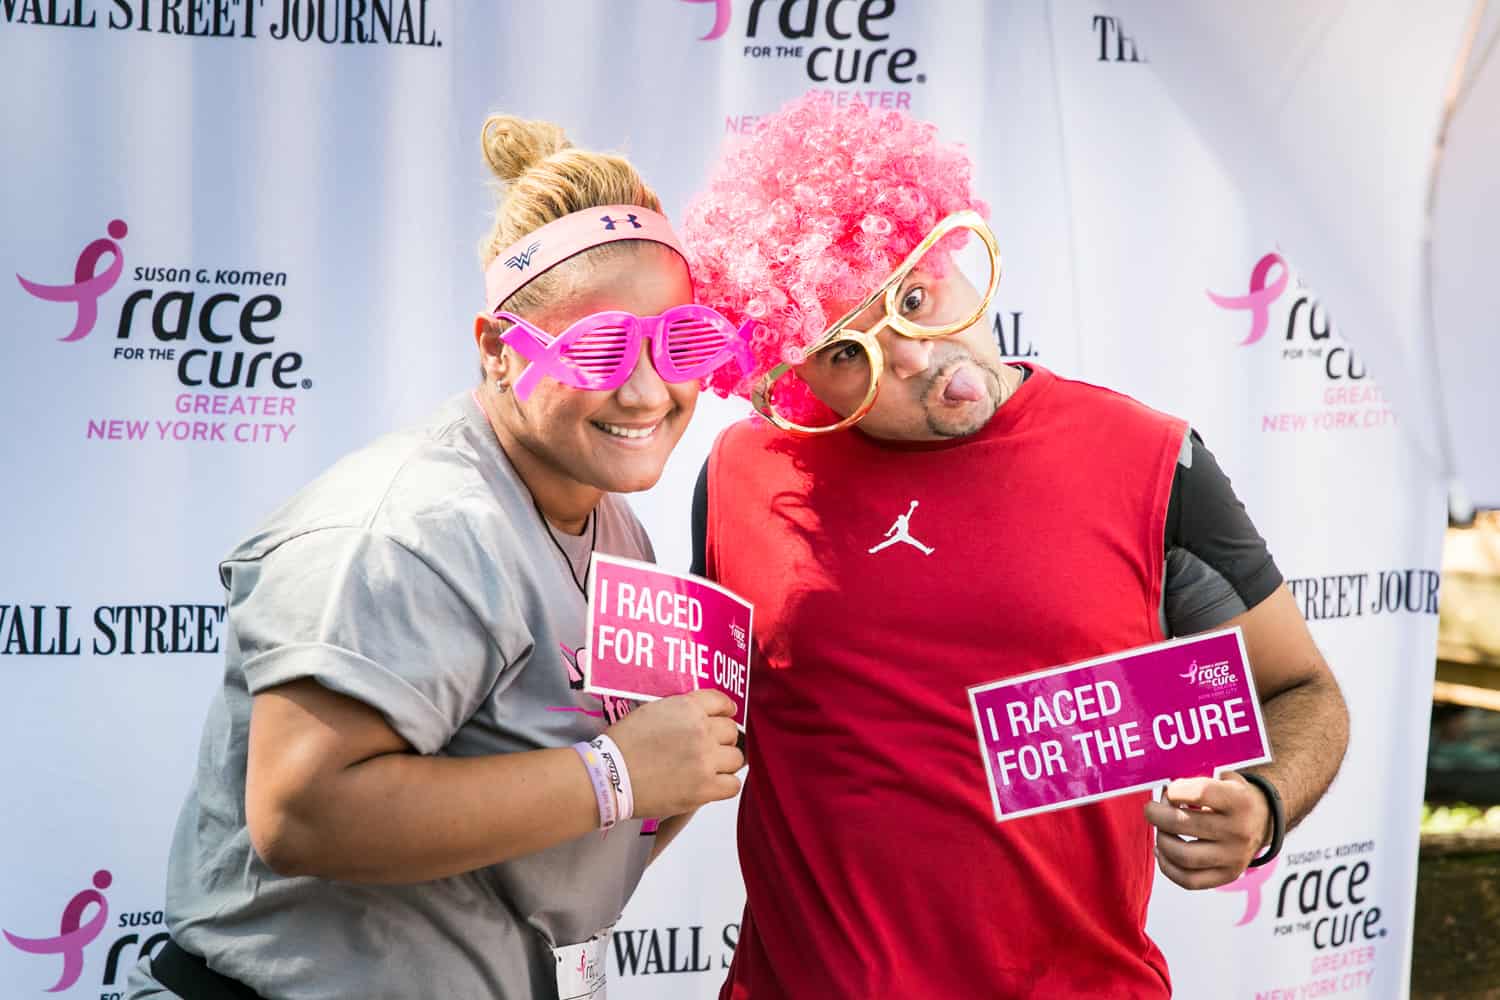 NYC Race for the Cure photos of couple clowning around at photobooth